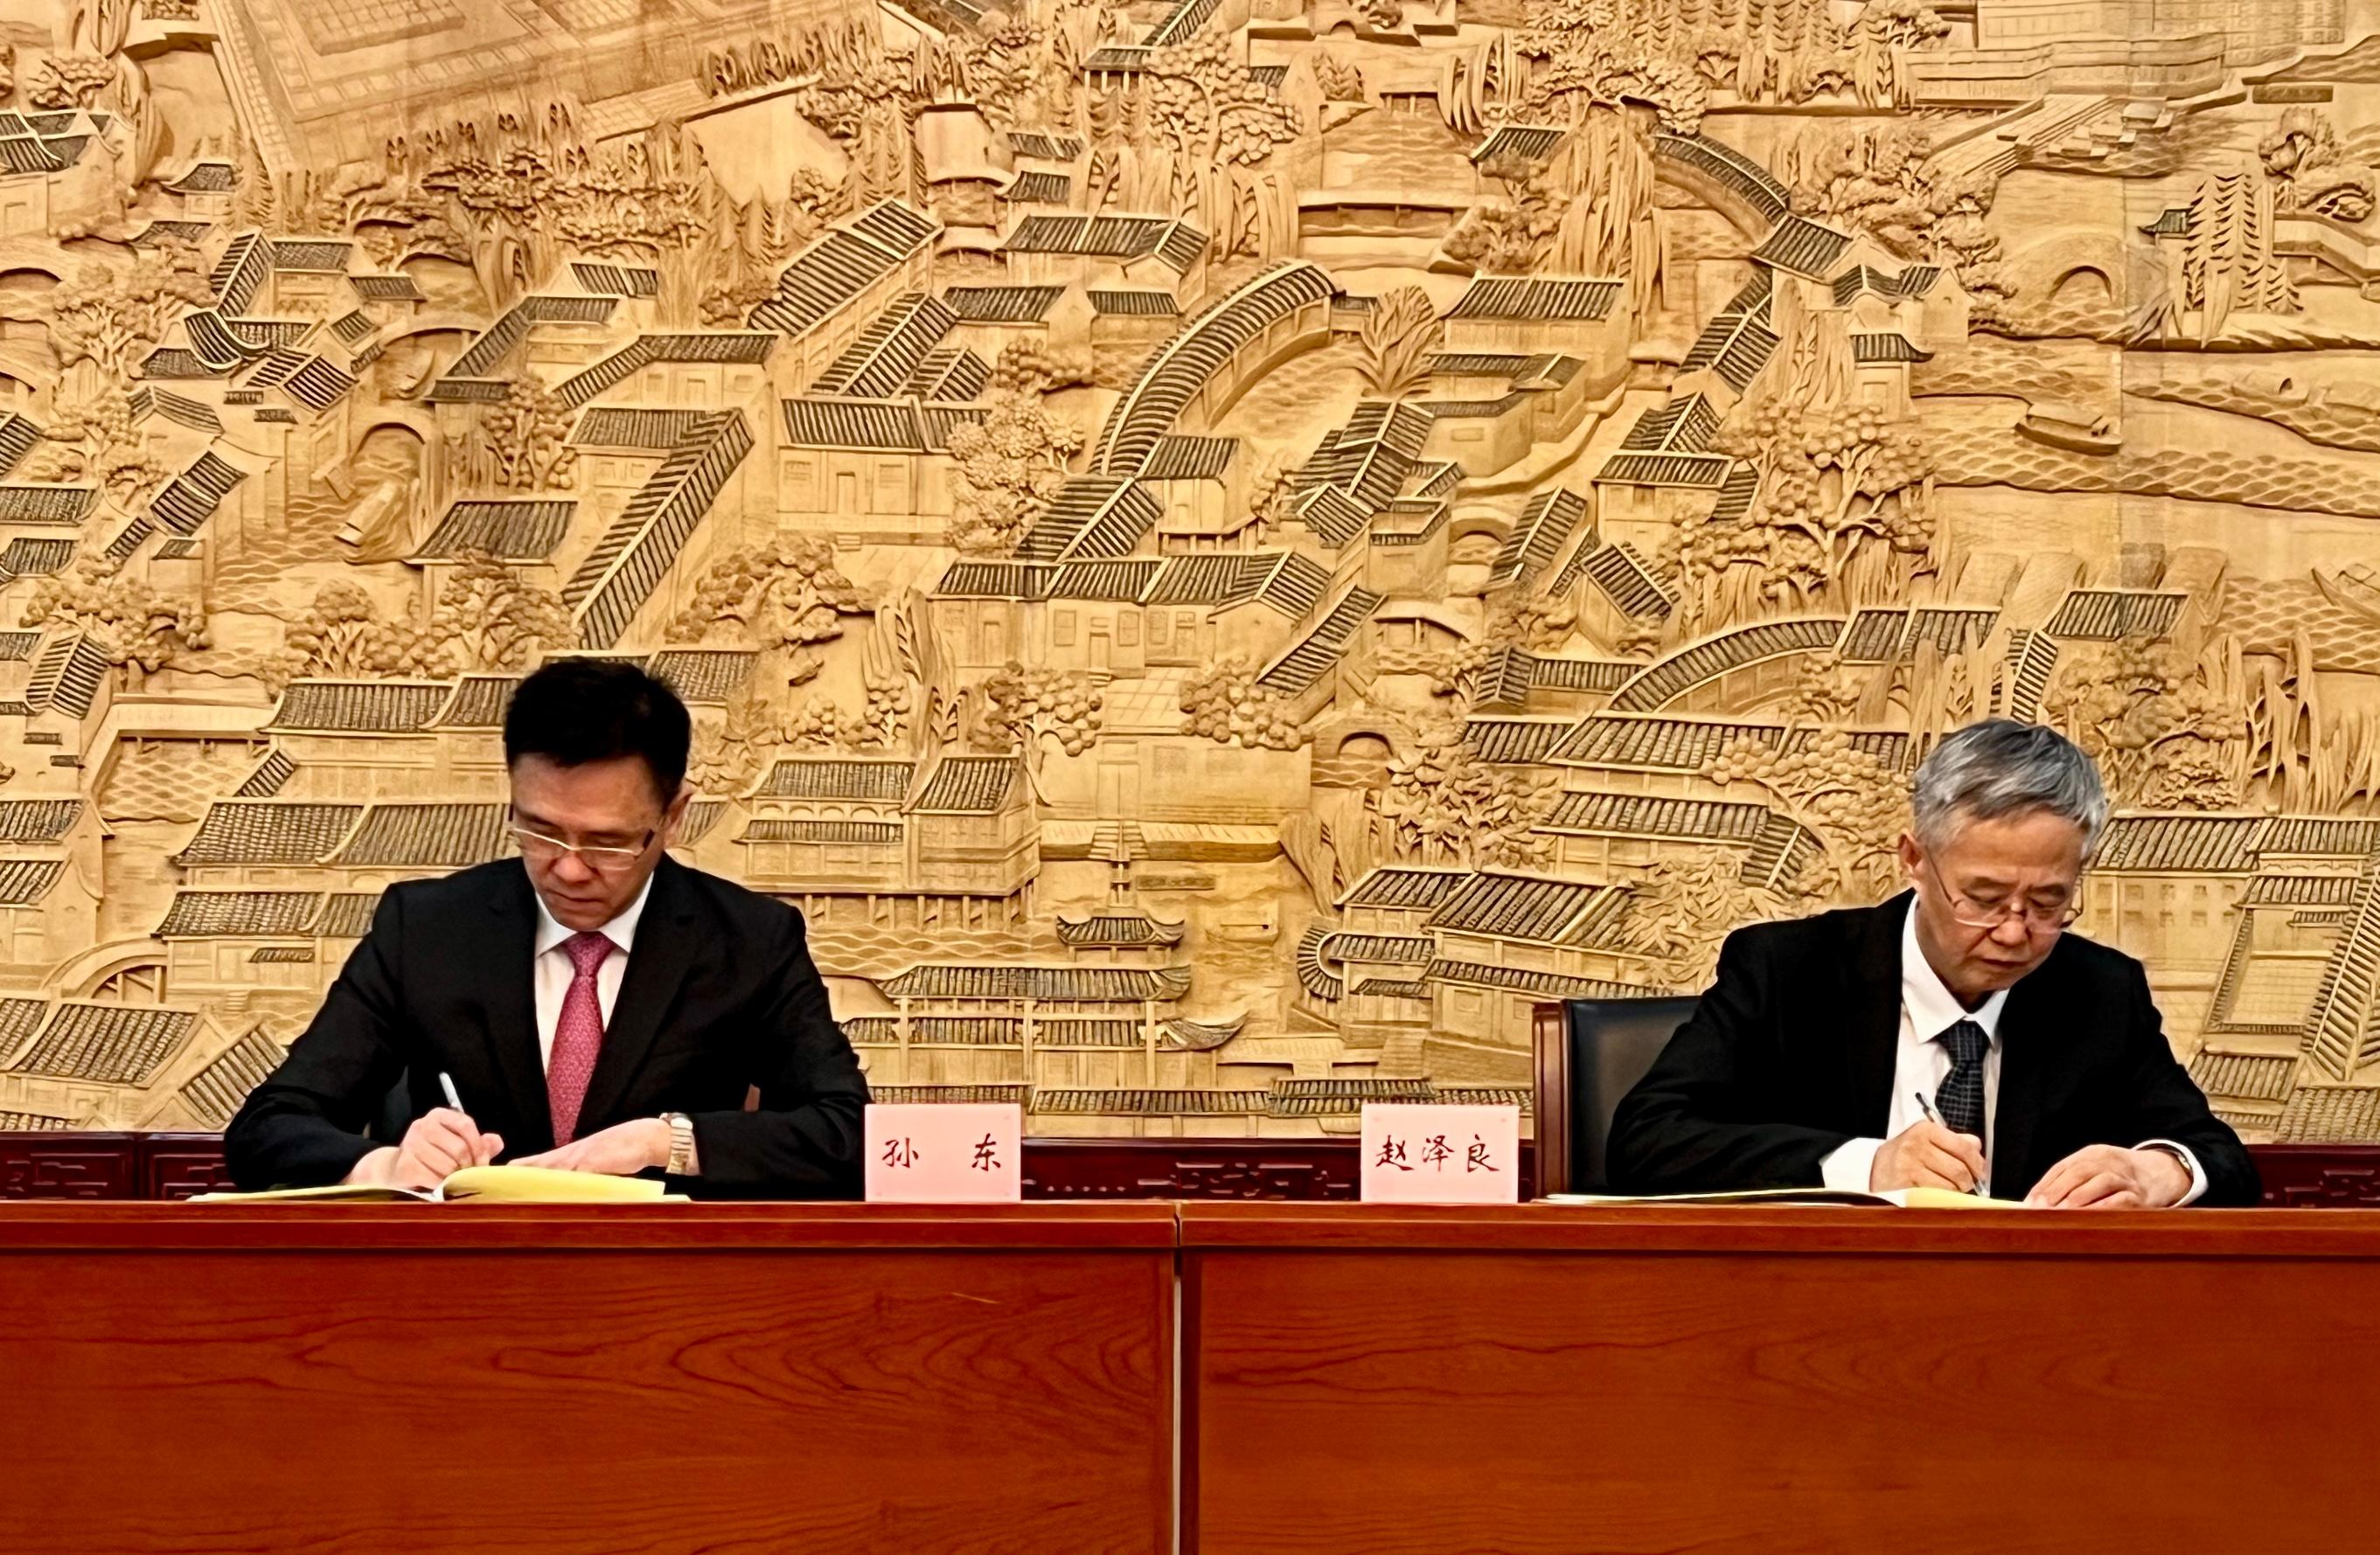 The Secretary for Innovation, Technology and Industry, Professor Sun Dong (left), and Deputy Director of the Cyberspace Administration of China Mr Zhao Zeliang (right), signed the Memorandum of Understanding on Facilitating Cross-boundary Data Flow Within the Guangdong-Hong Kong-Macao Greater Bay Area in Beijing yesterday (June 29).